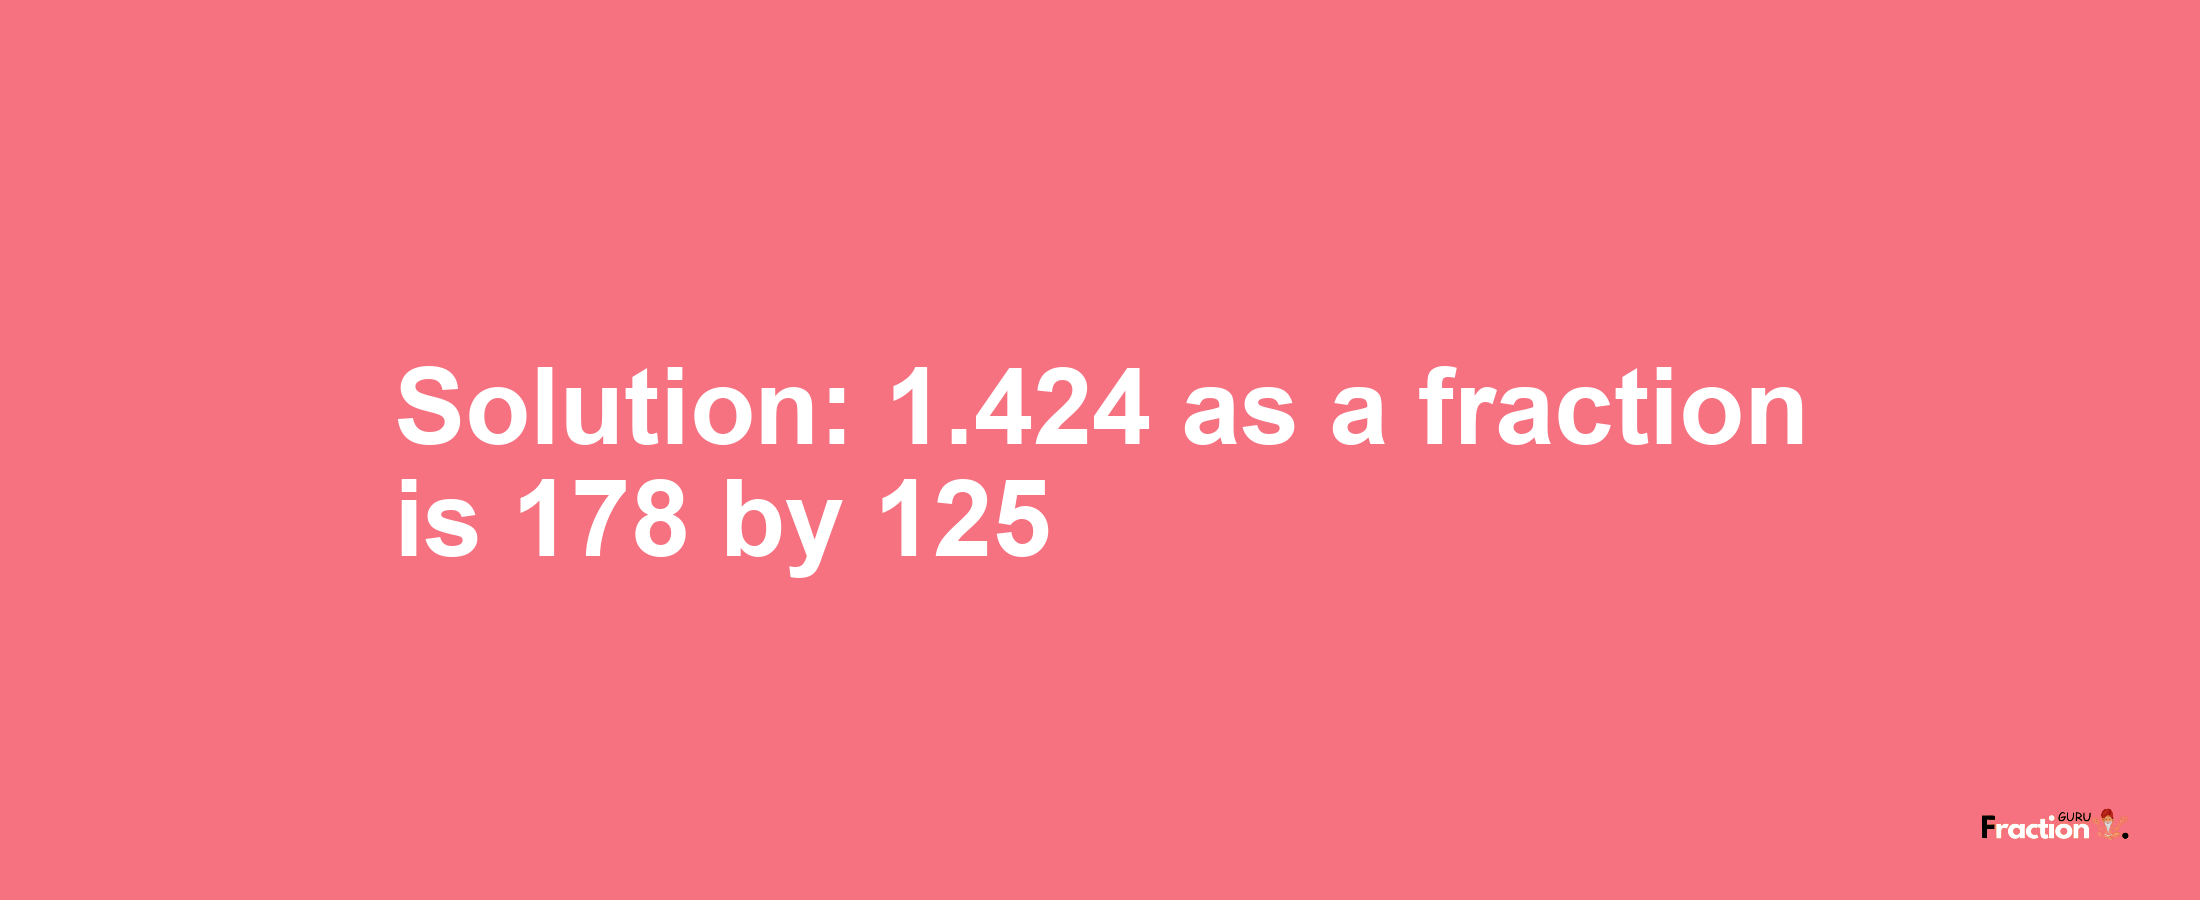 Solution:1.424 as a fraction is 178/125